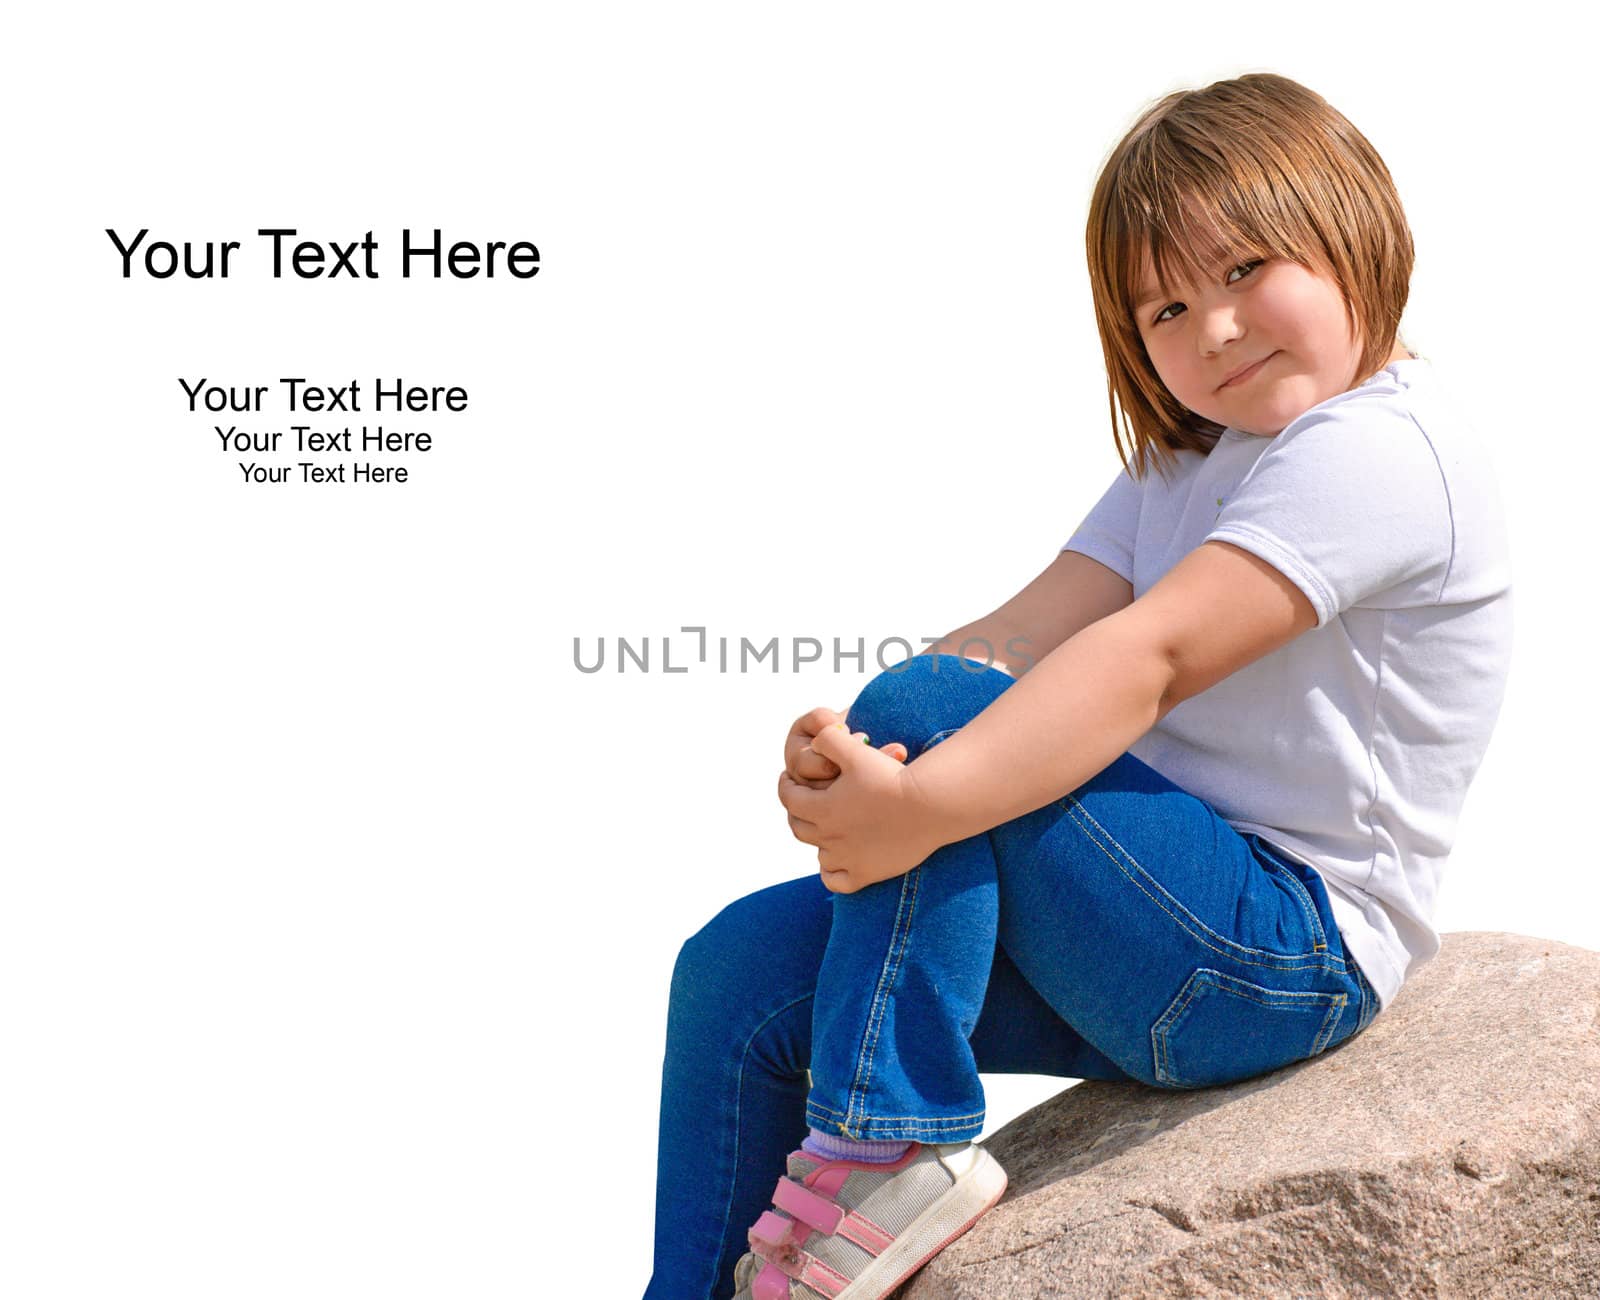 A cute five year old girl posing on a rock outside, isolated against a white background.